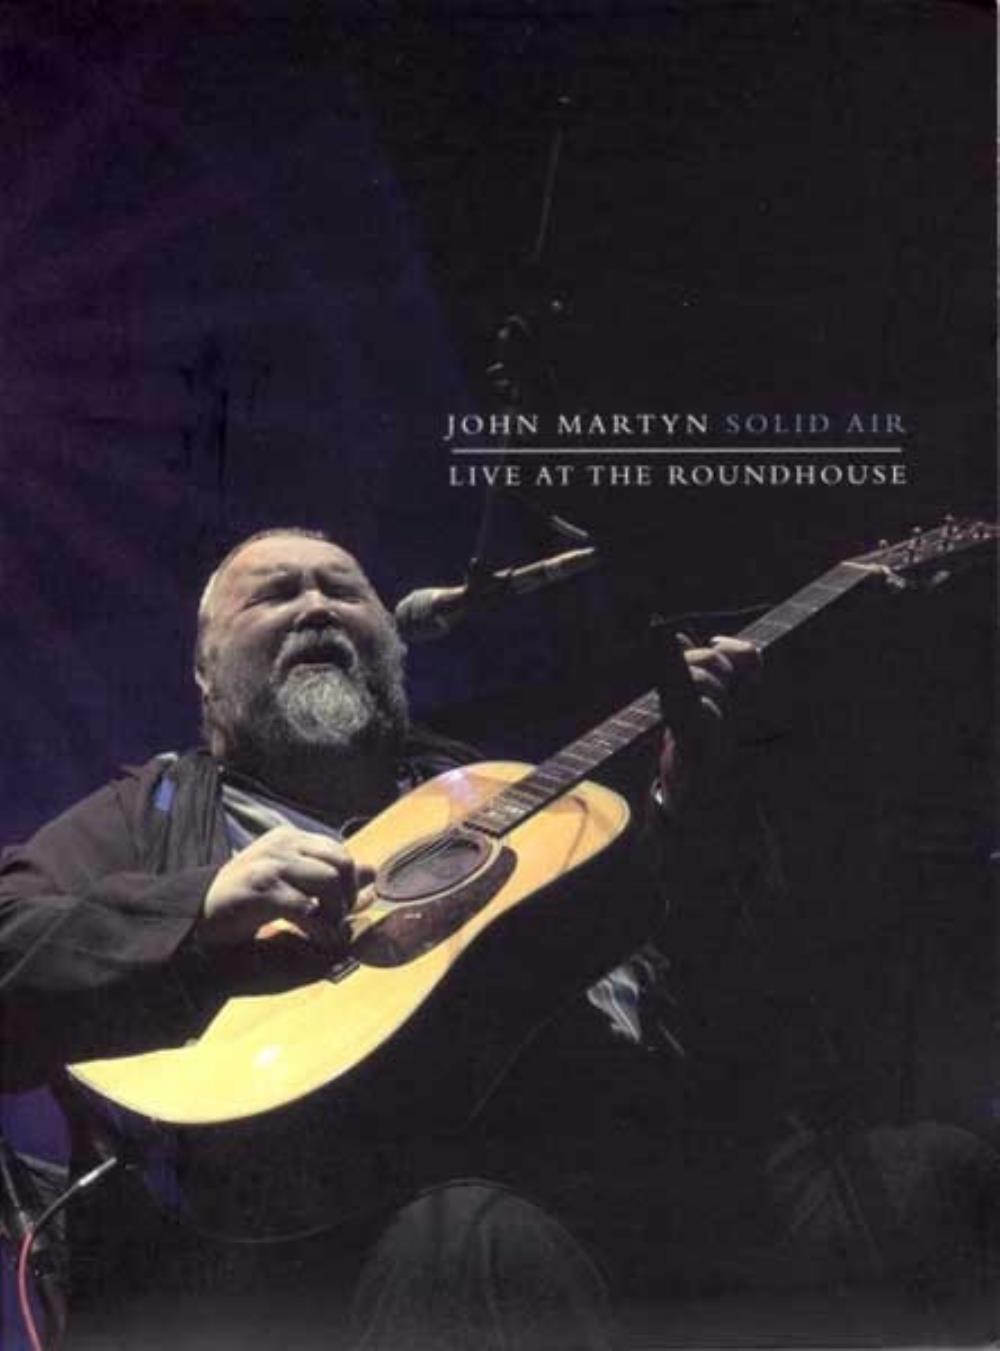 John Martyn - Solid Air - Live at The Roundhouse CD (album) cover